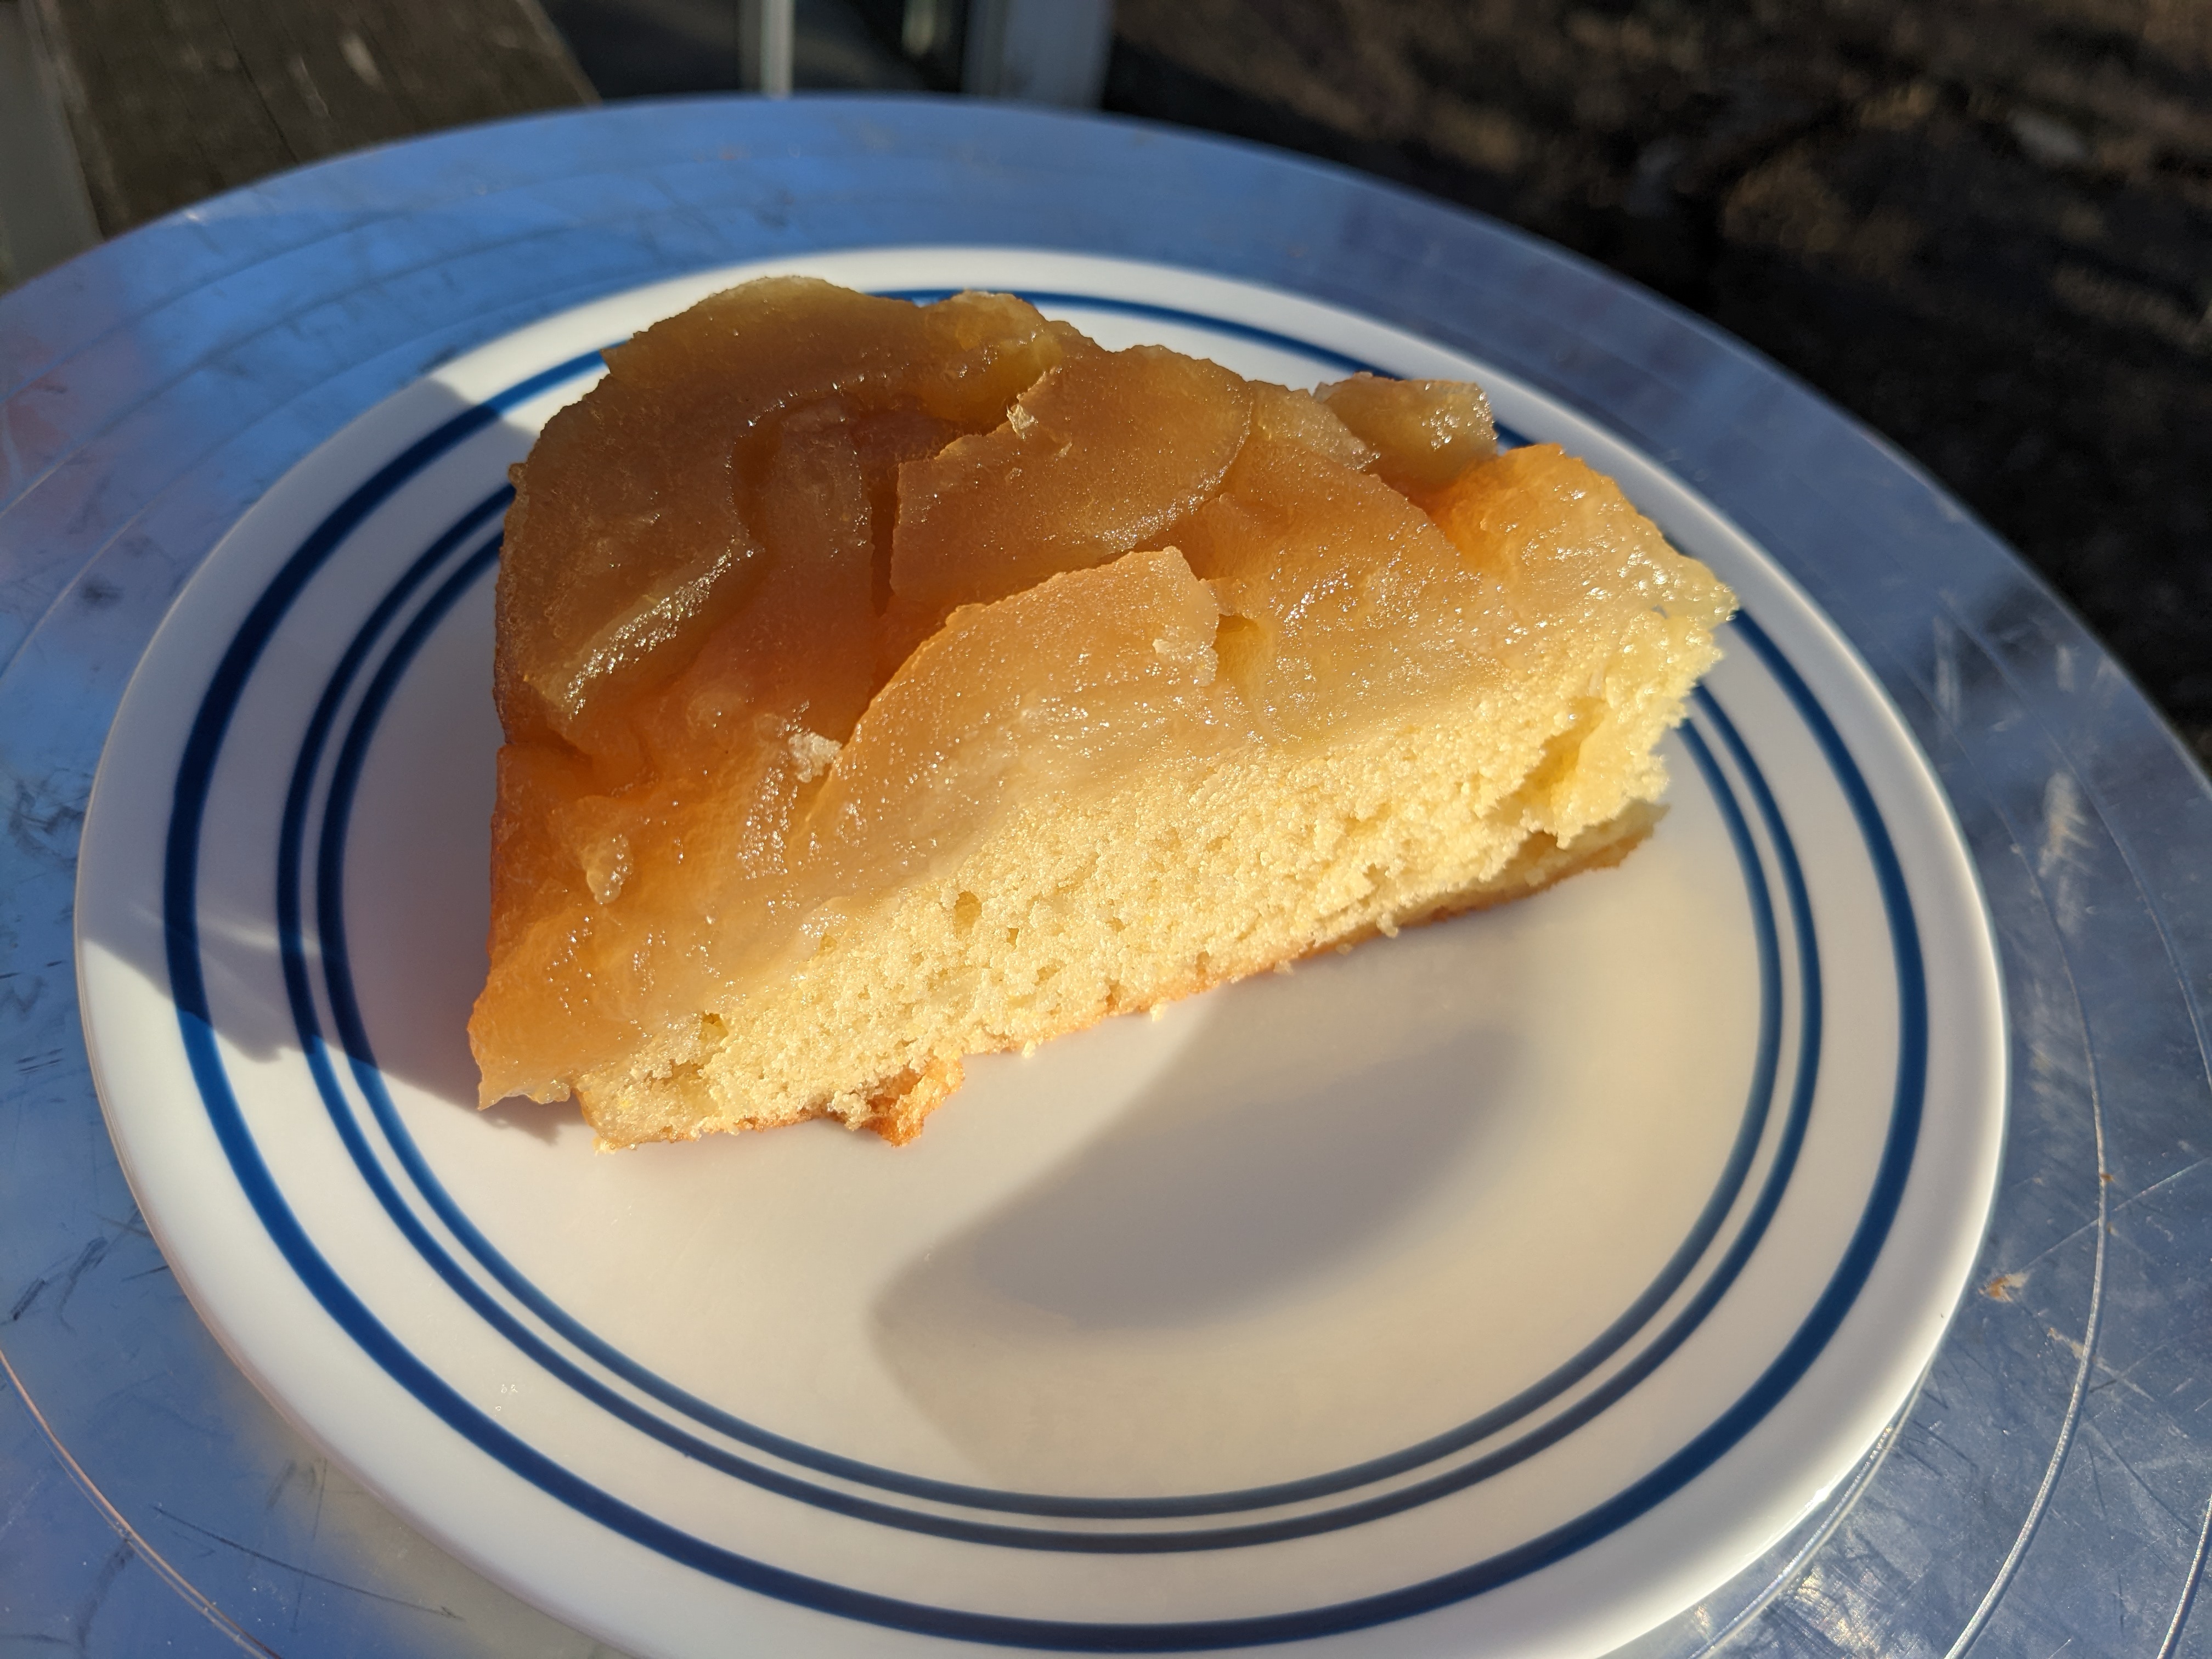 A slice of yellow cake with cooked apples on top